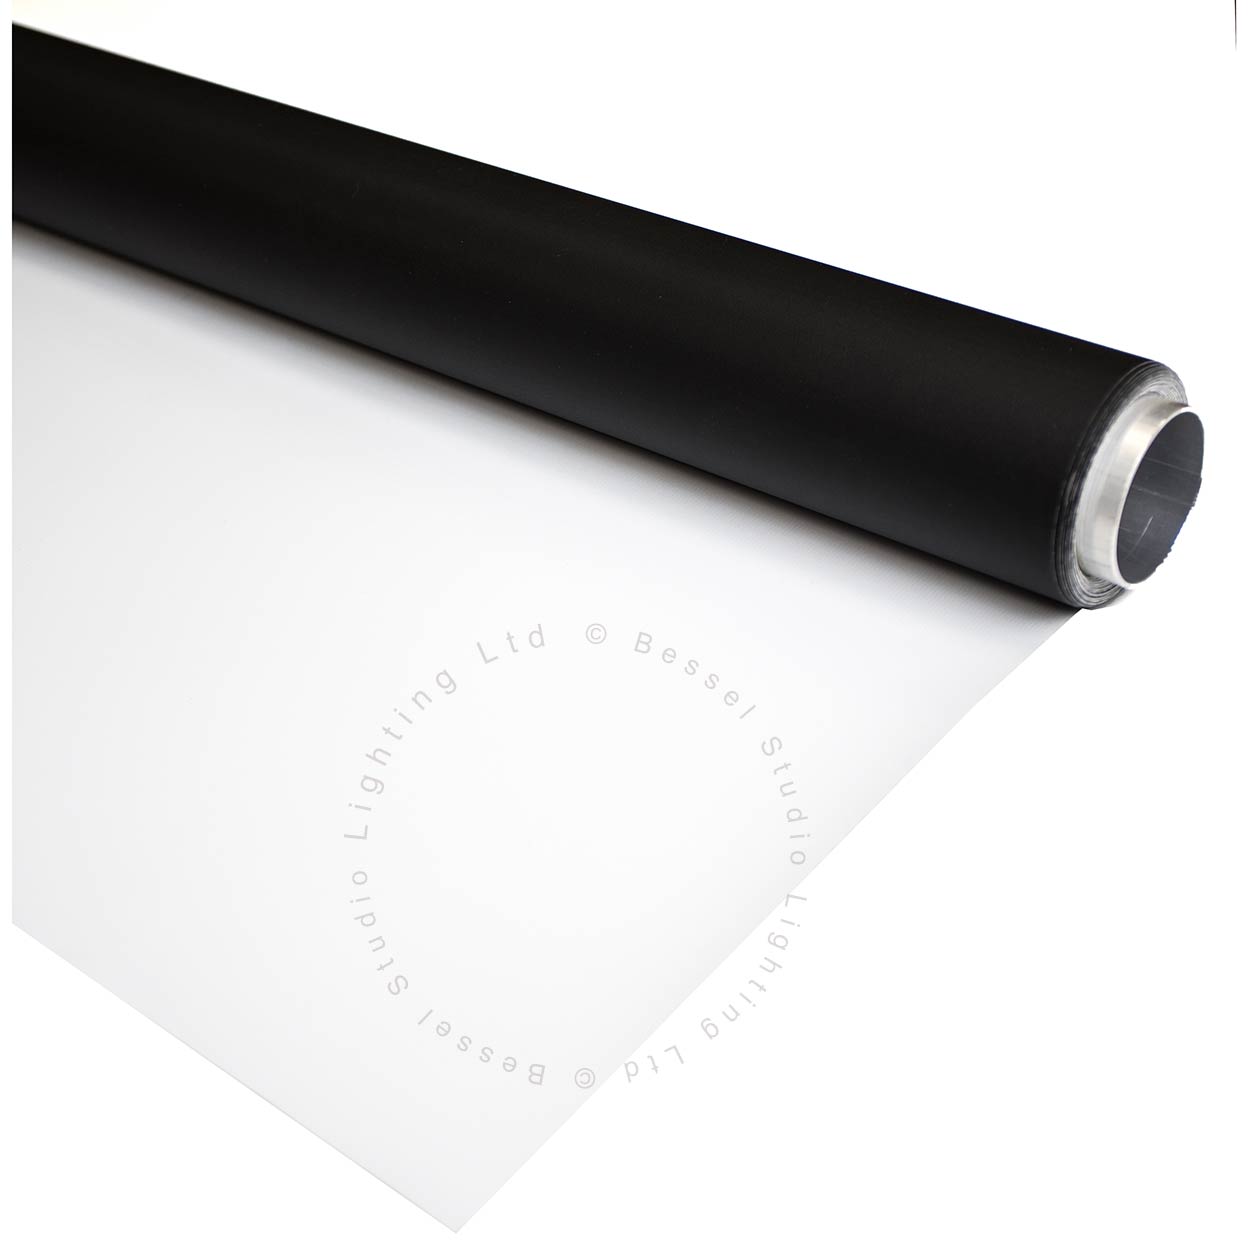 135cm x 3m Black and White Double Sided Vinyl Background